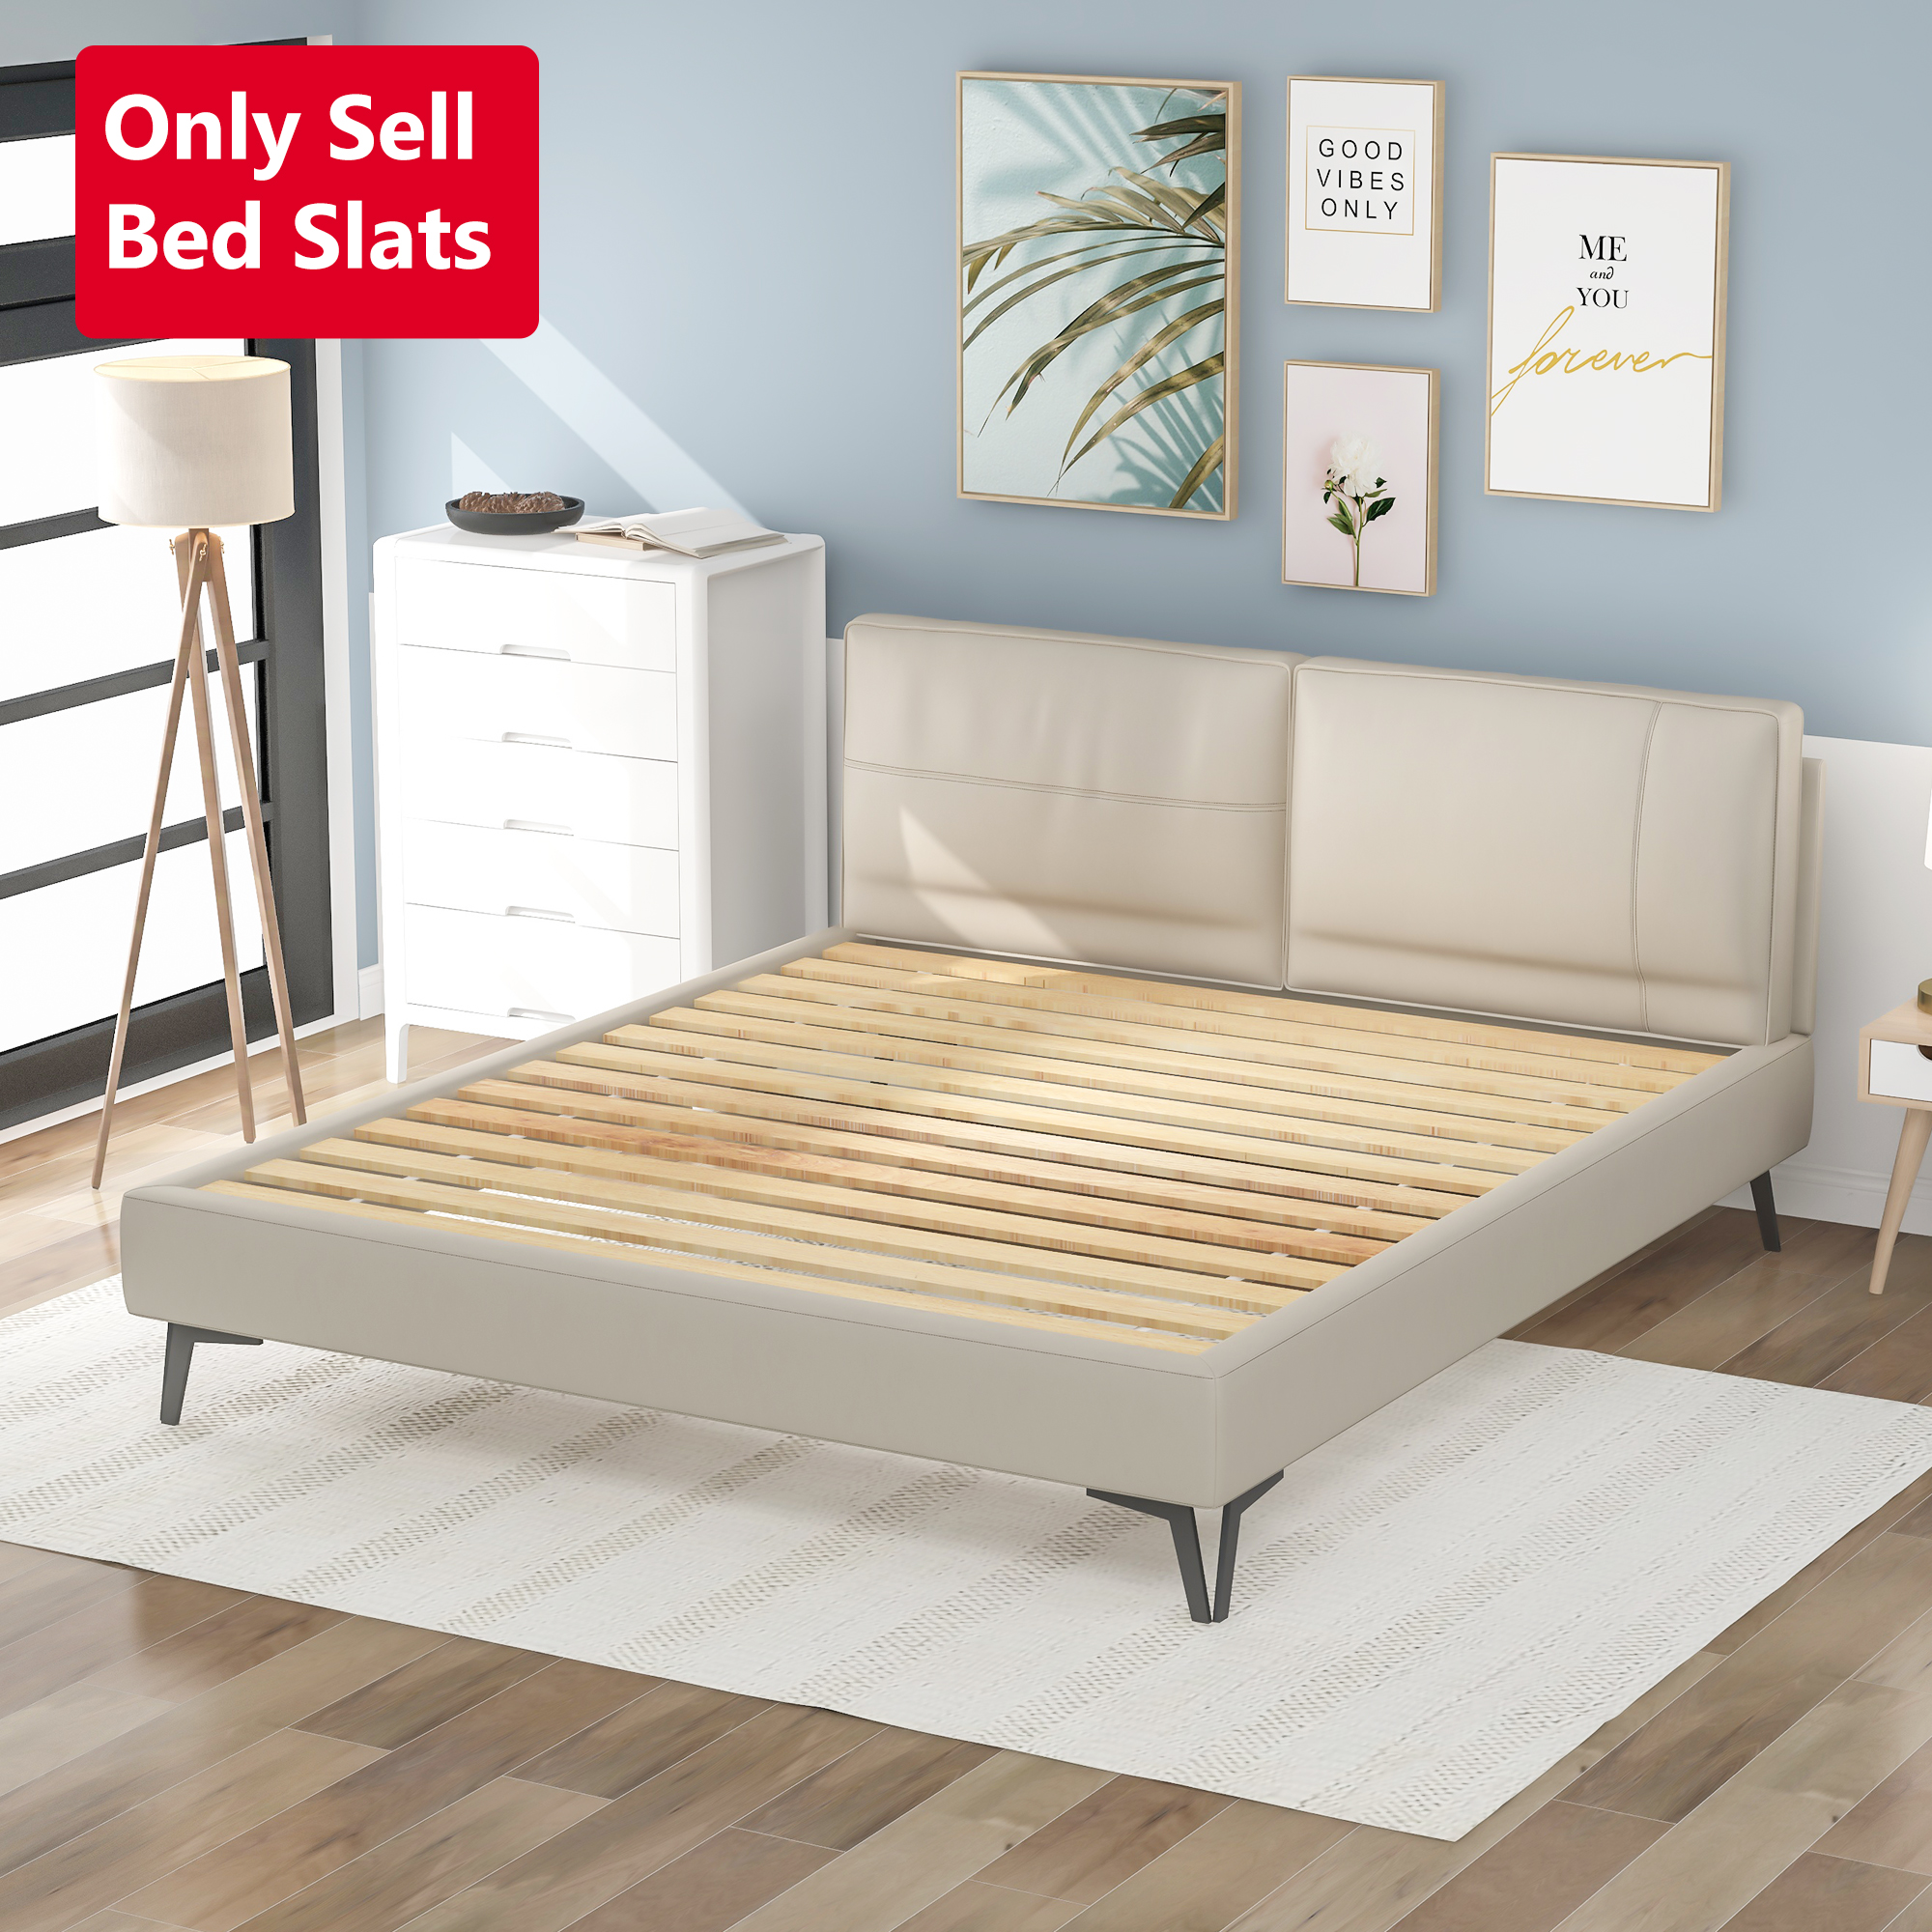 Queen Size Pine Wood Bed Slats(Only Sell Slats!)-Boyel Living